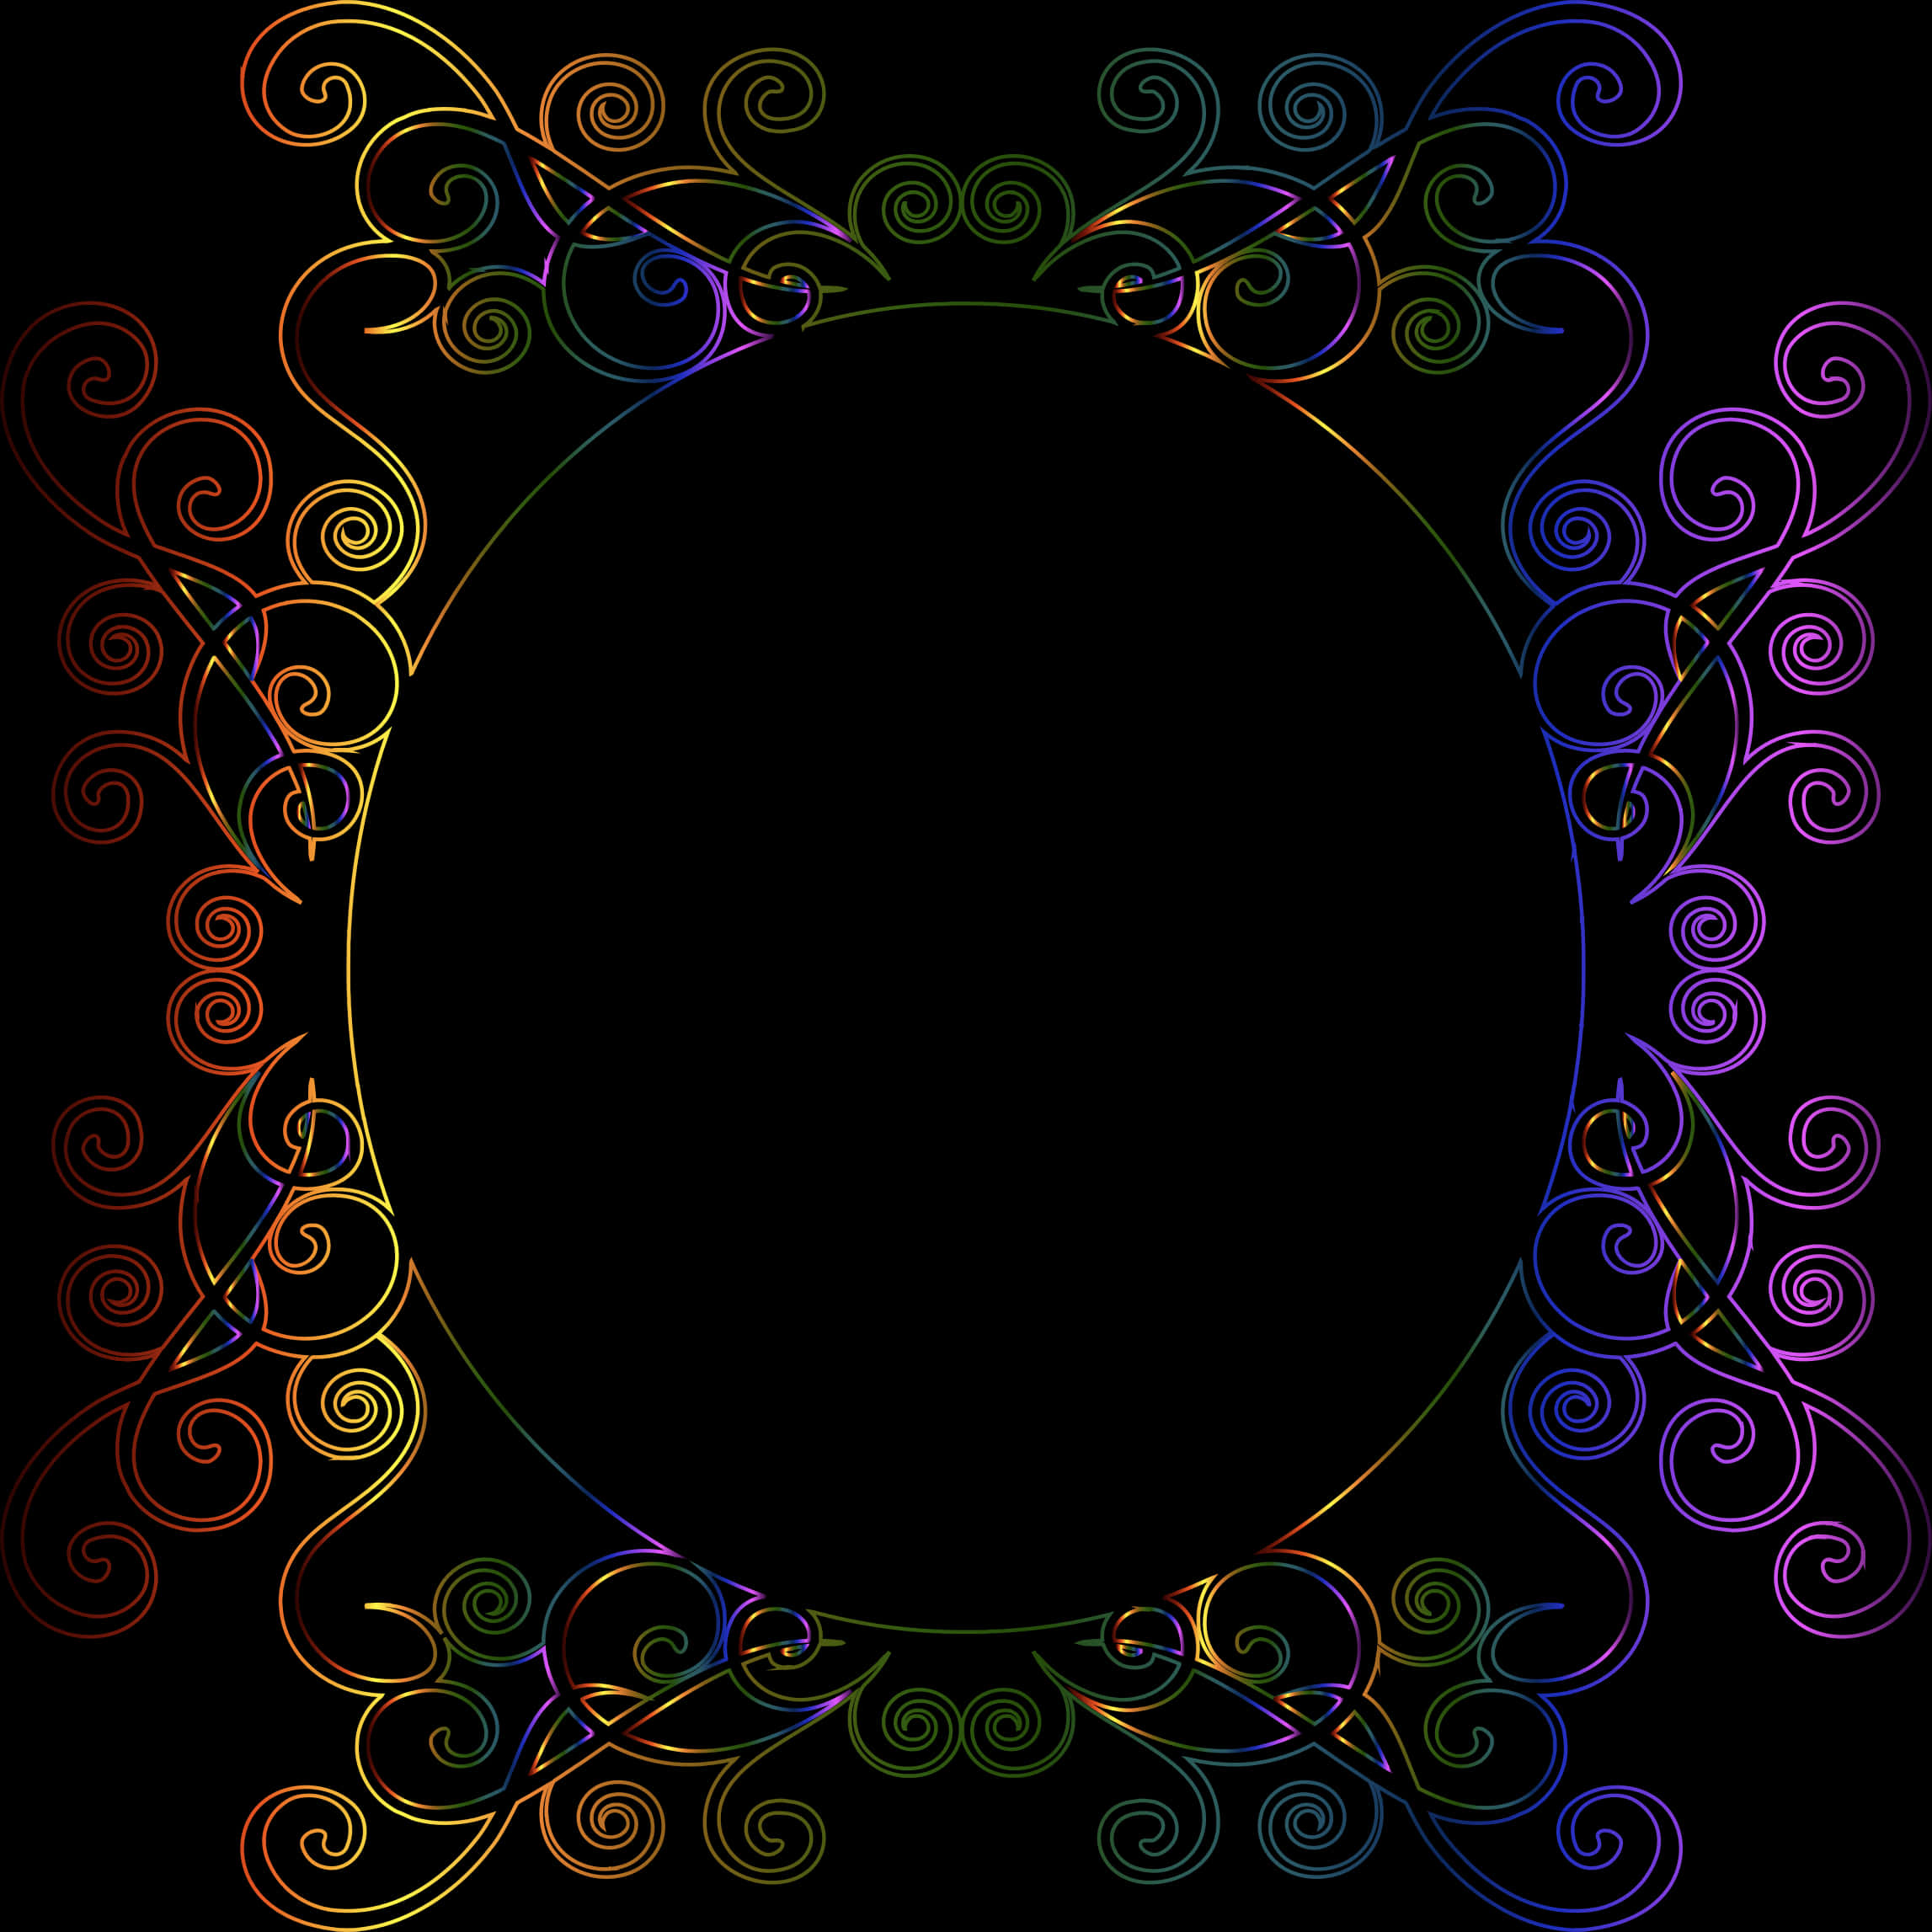 A Colorful Swirly Frame On A Black Background